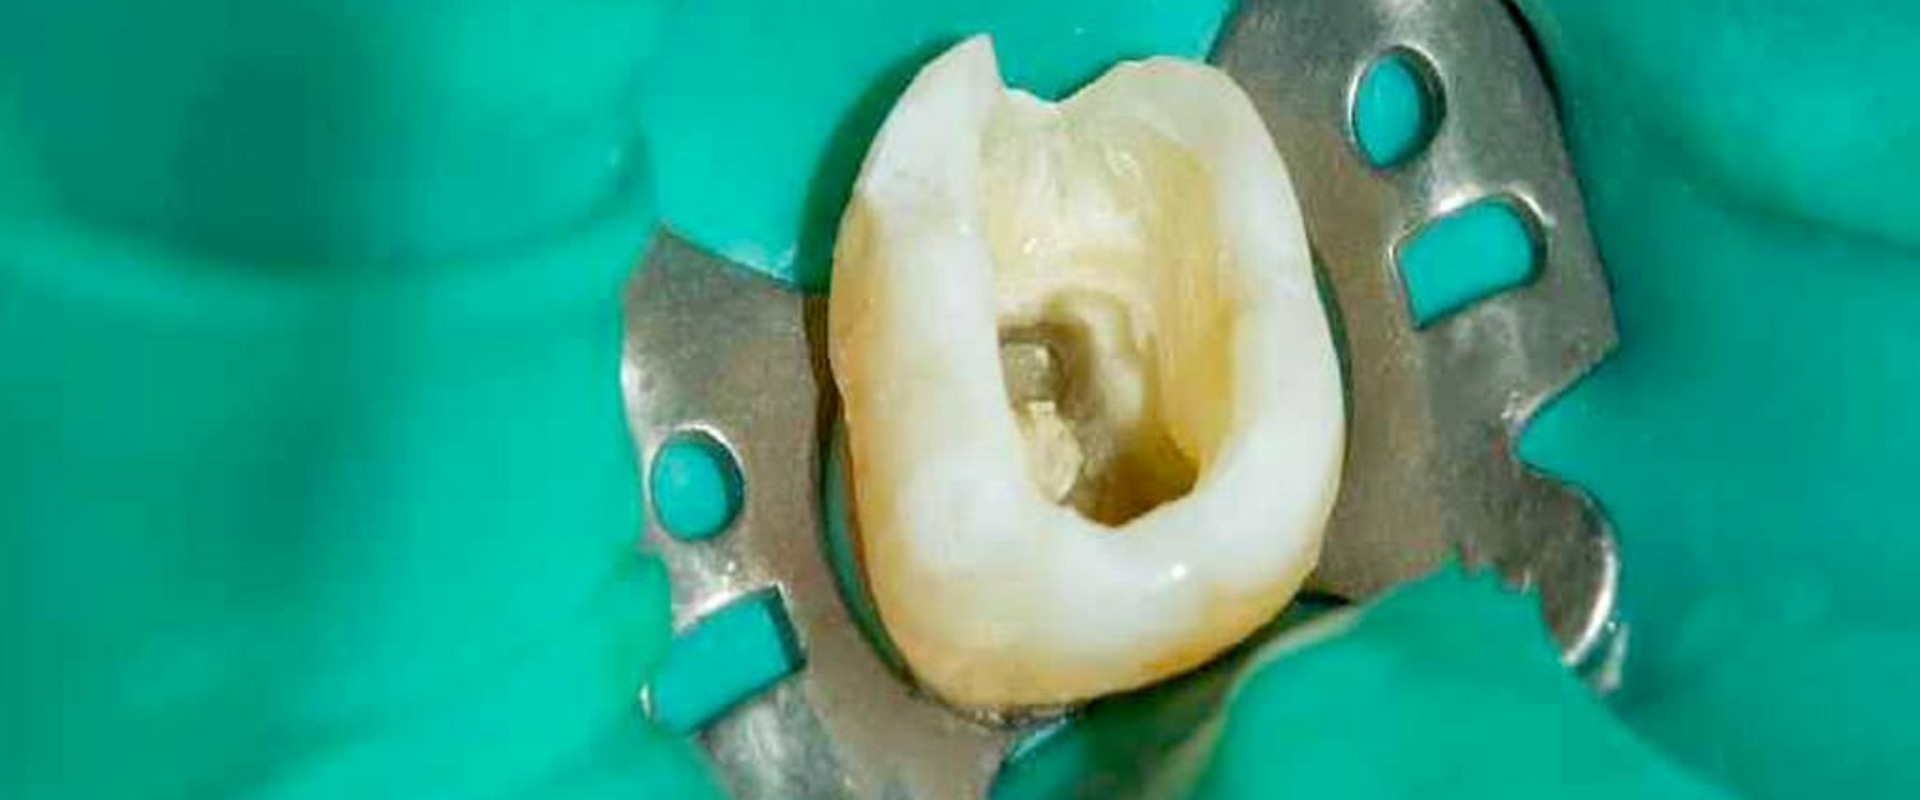 What Do Endodontists Do Besides Root Canals?